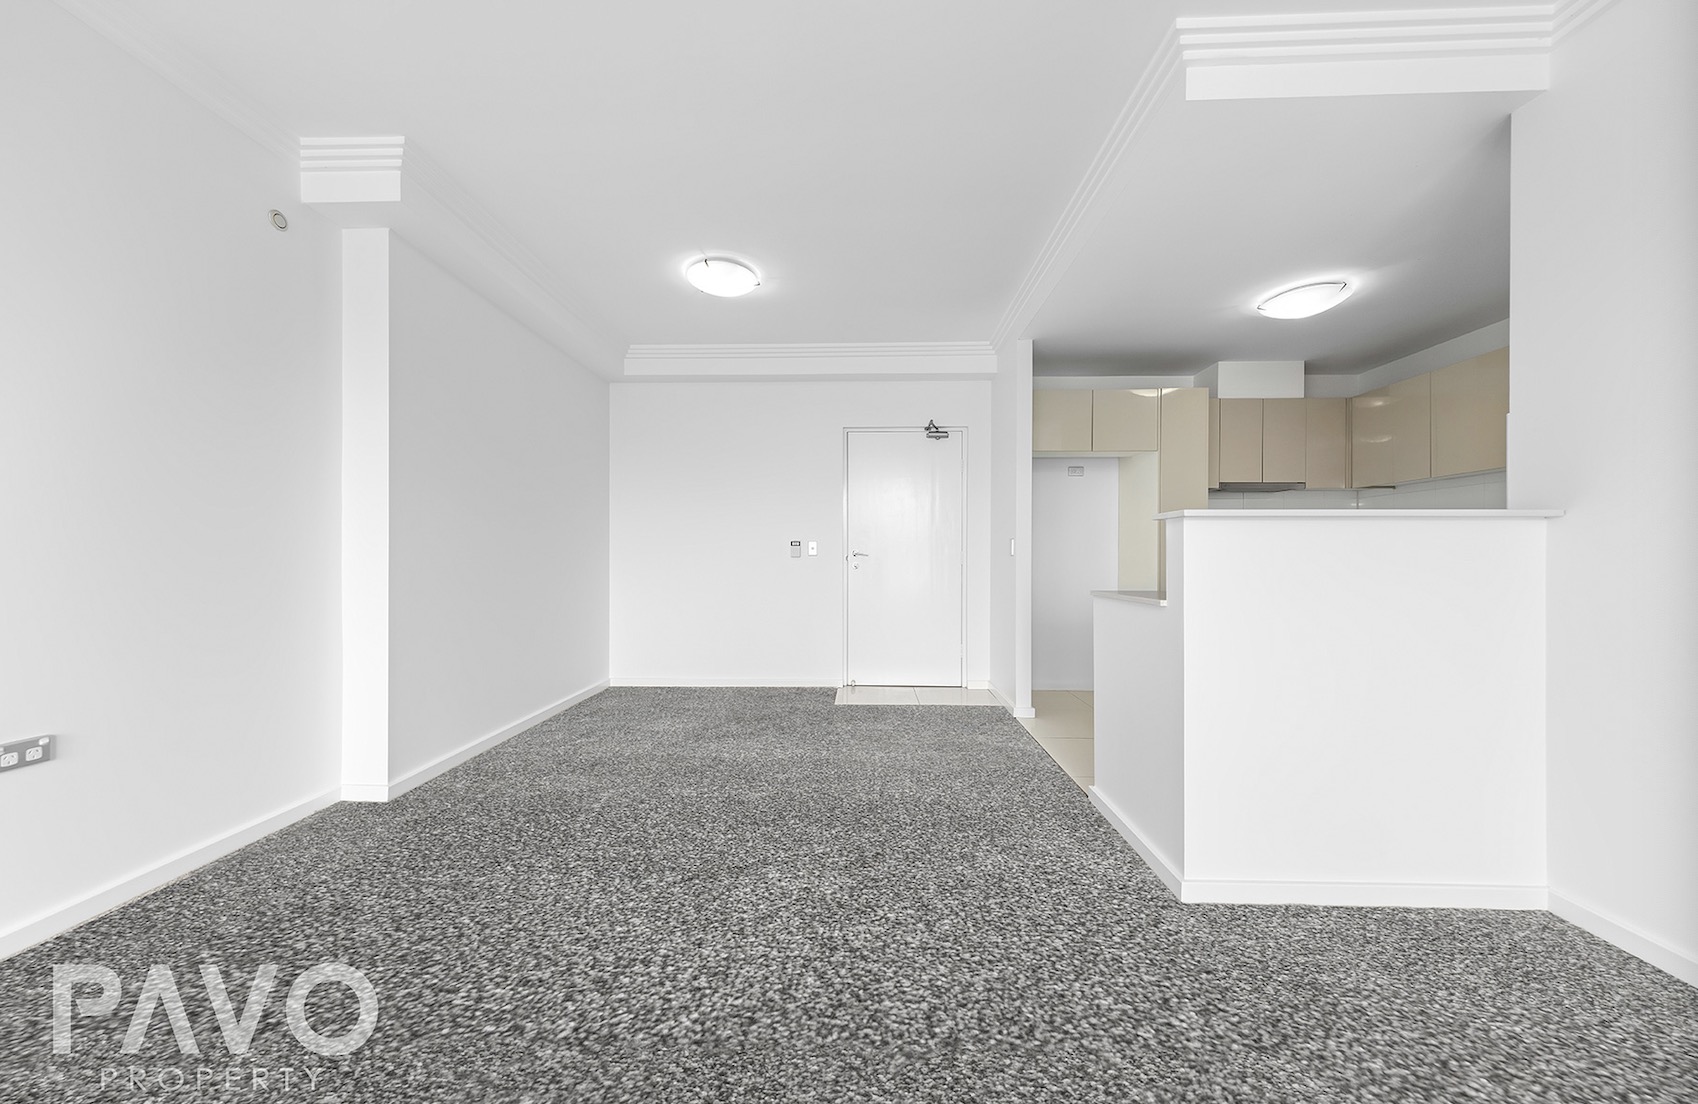 Carlingford, New South Wales 2118, 2 Bedrooms Bedrooms, ,2 BathroomsBathrooms,Apartment,For Sale,1019